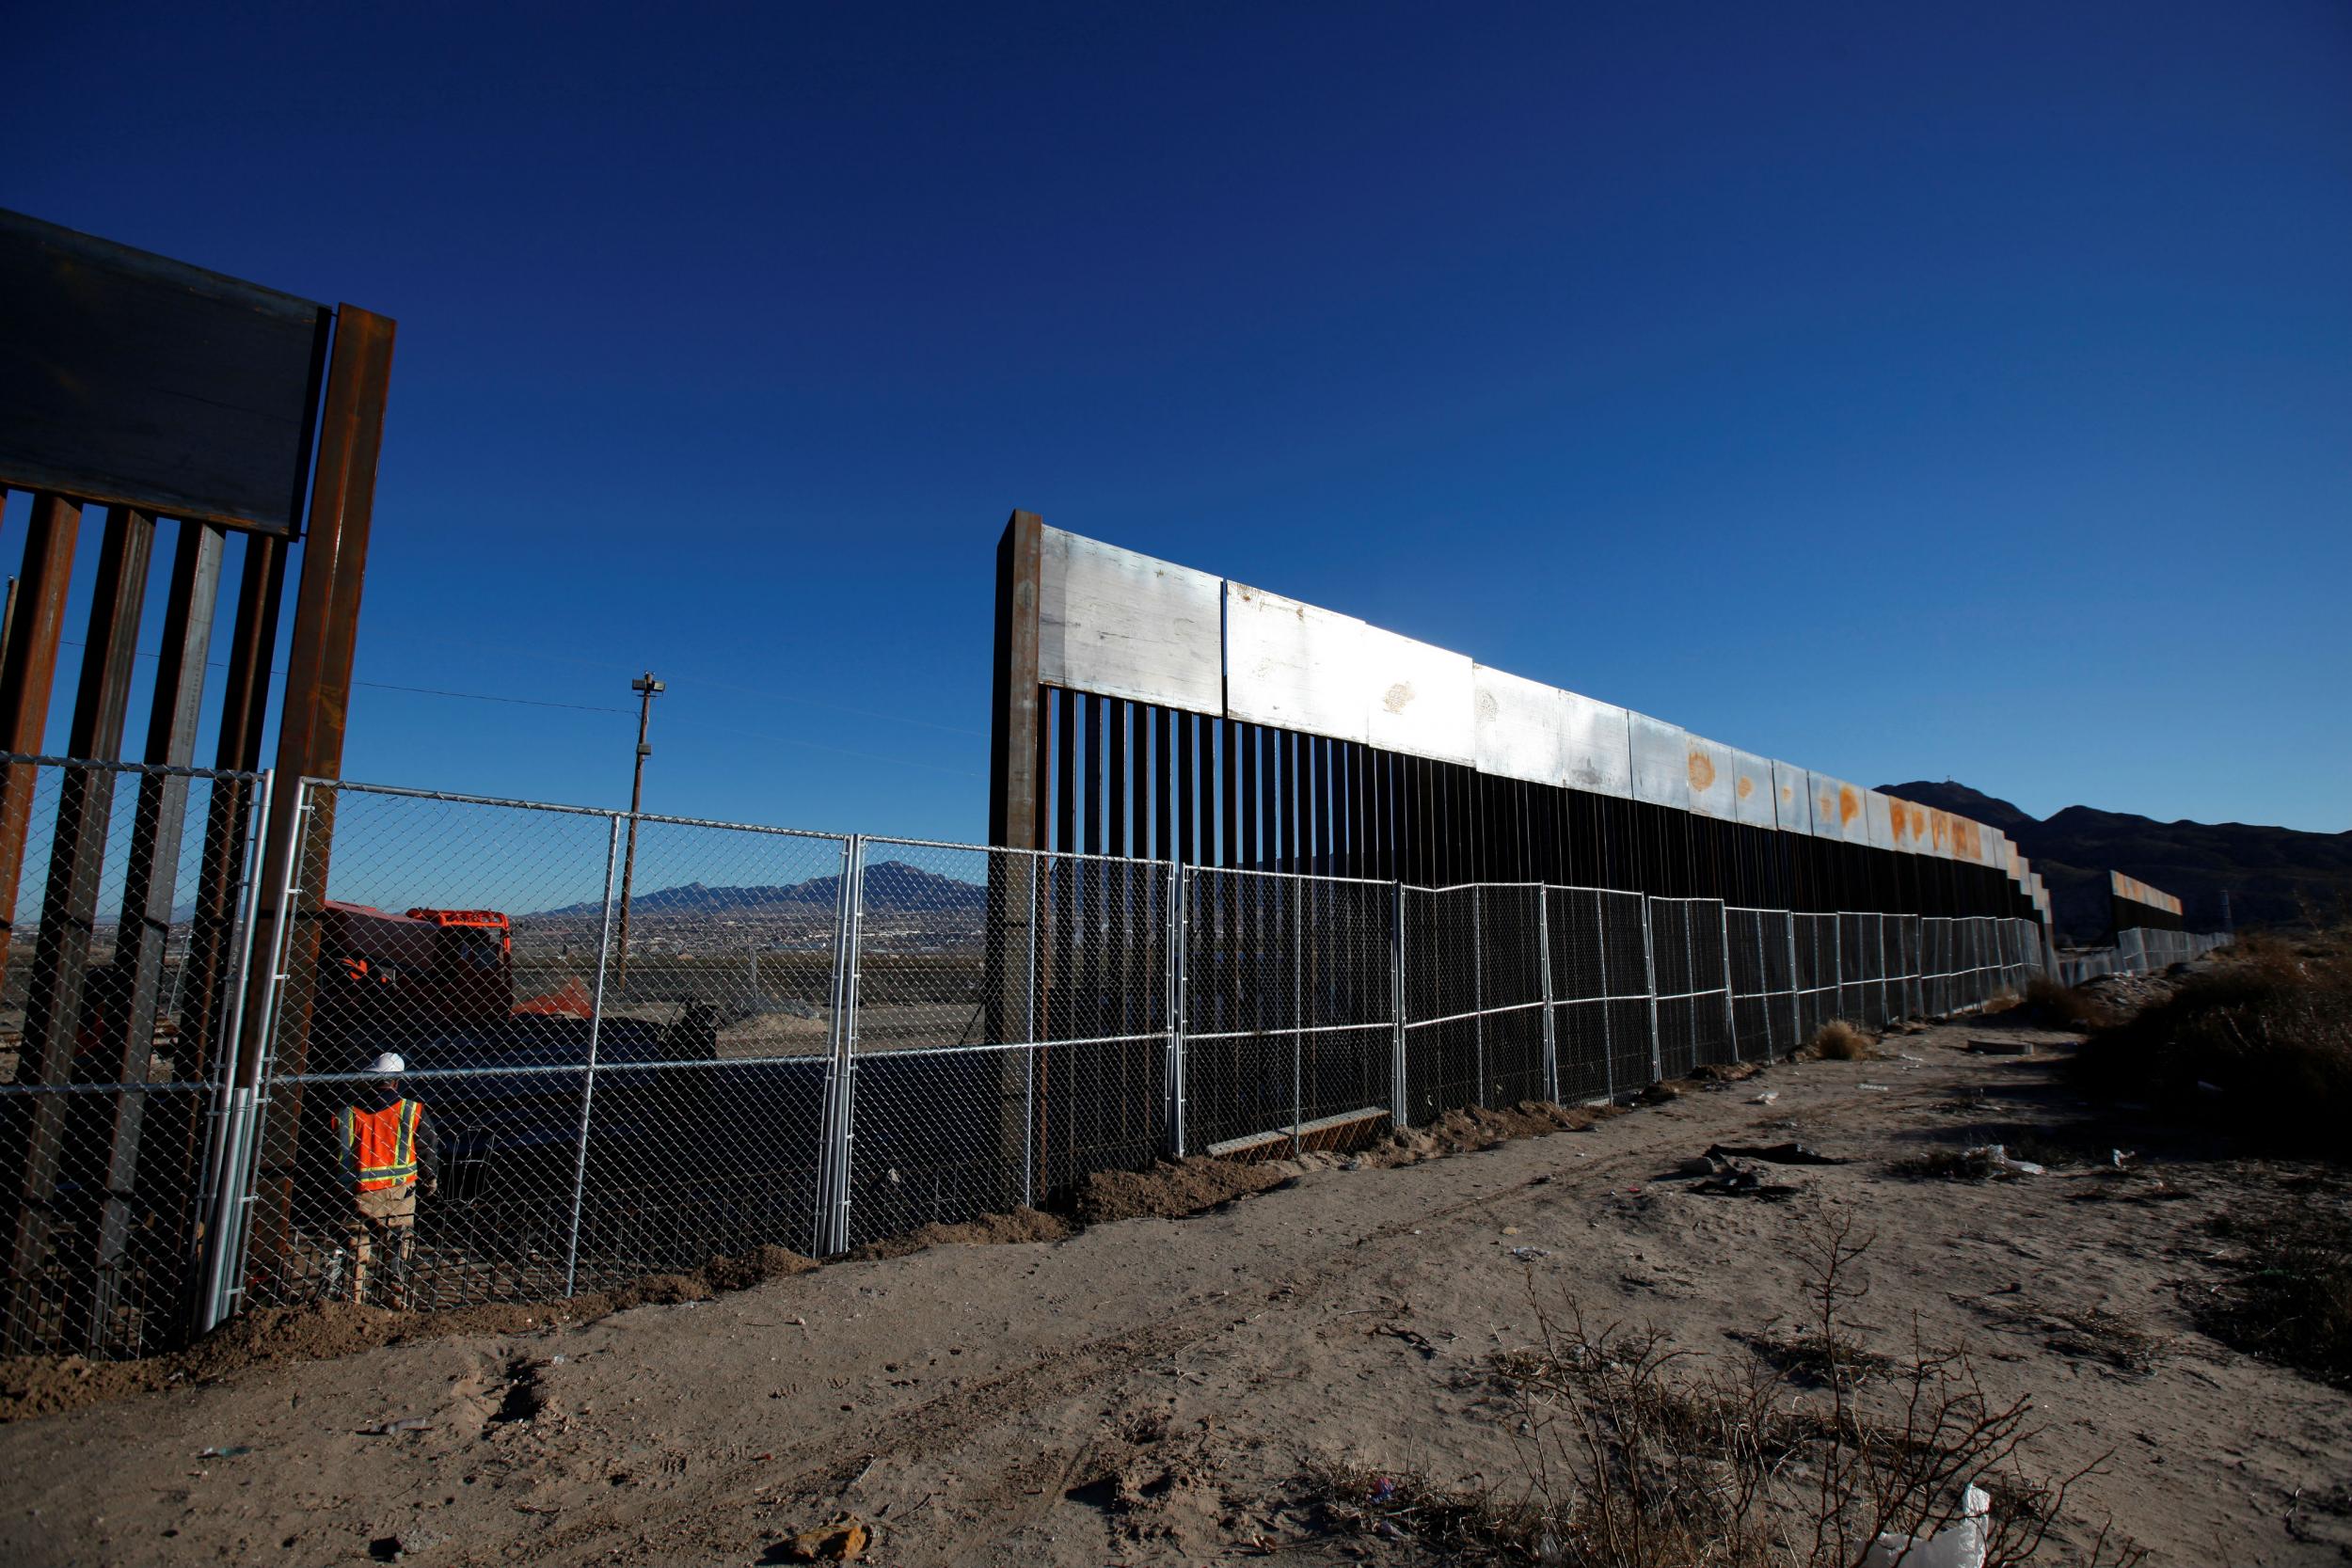 A worker stands next to a newly built section of the U.S.-Mexico border fence at Sunland Park, U.S. opposite the Mexican border city of Ciudad Juarez, Mexico.